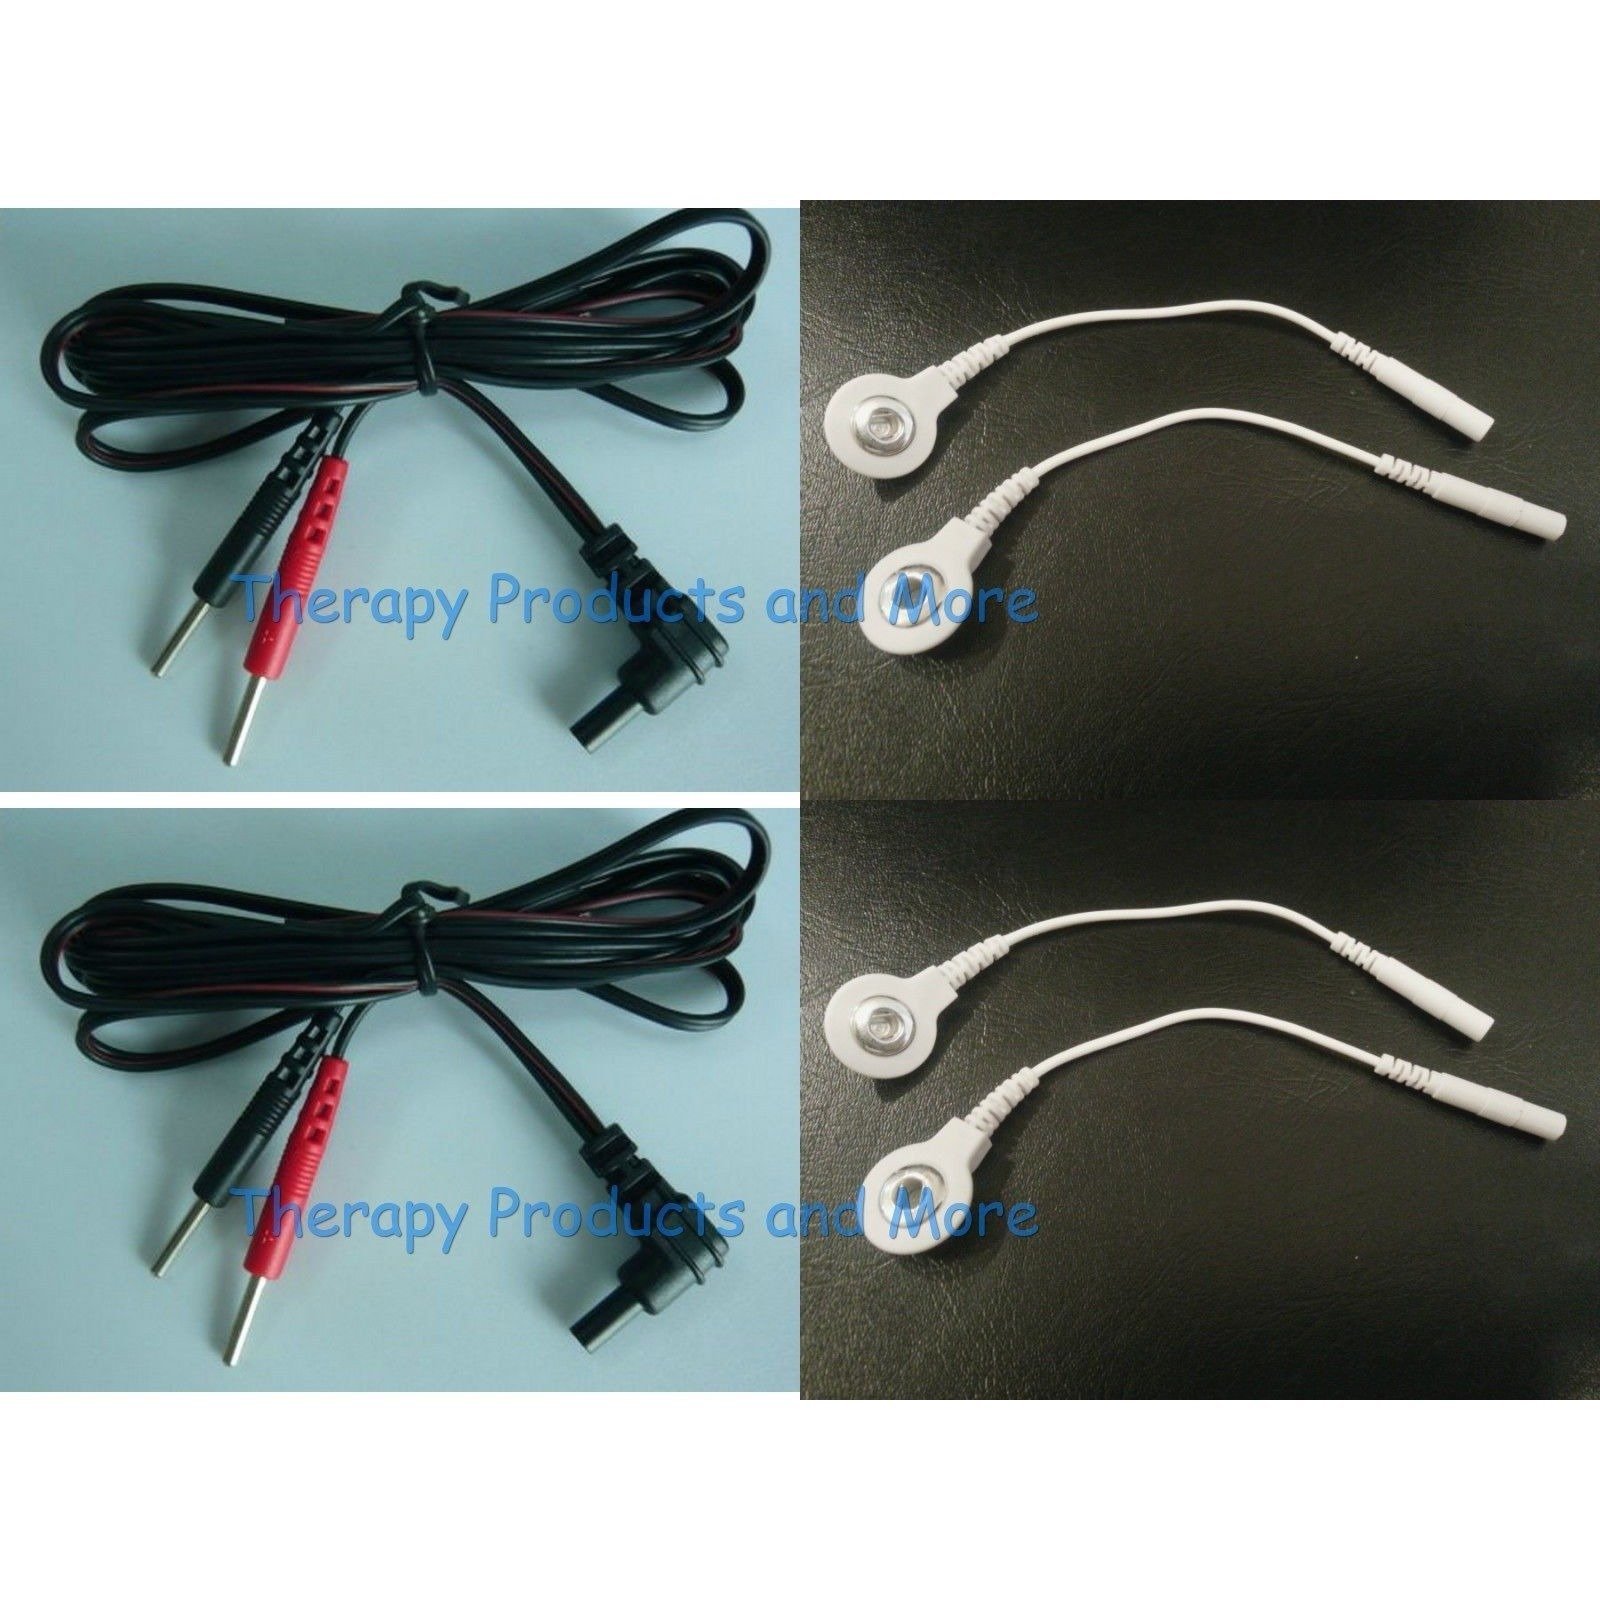 Replacement Electrode Lead Wires LG TEC Elite, Twin Stim -Use Snap or Pin Pads! - $18.95